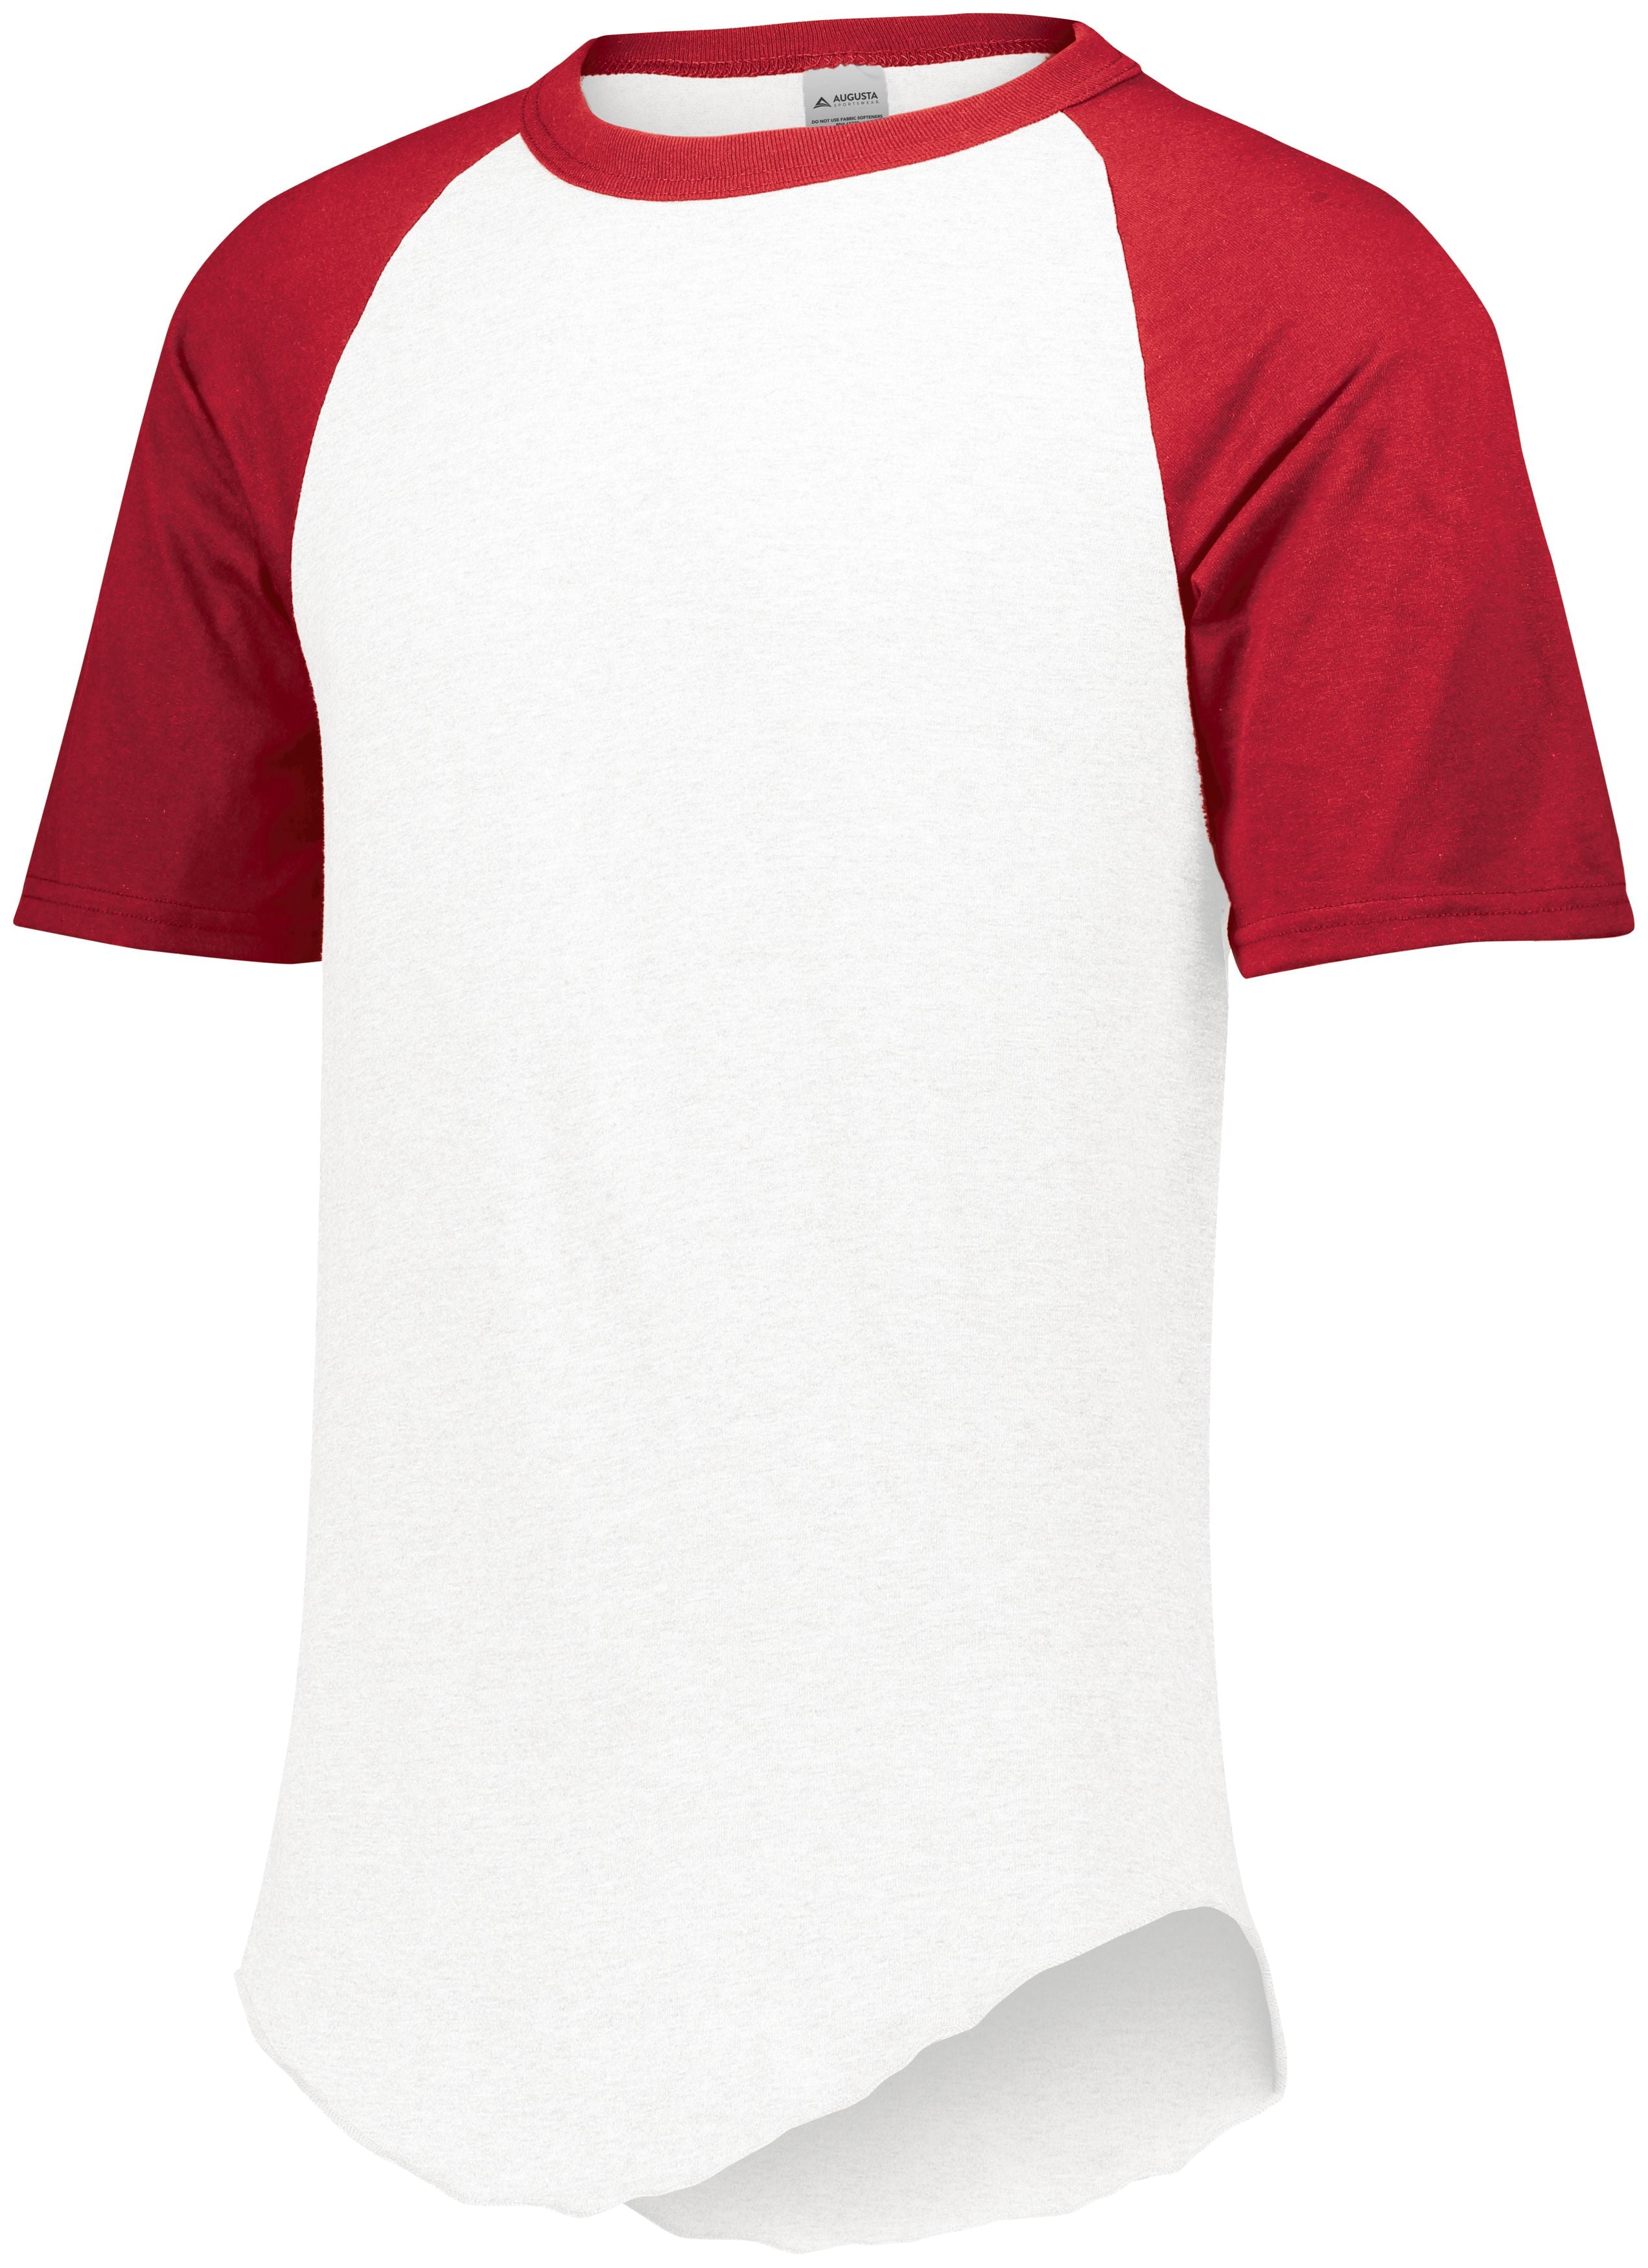 Augusta Sportswear Short Sleeve Baseball Jersey in White/Red  -Part of the Adult, Adult-Jersey, Augusta-Products, Baseball, Shirts, All-Sports, All-Sports-1 product lines at KanaleyCreations.com